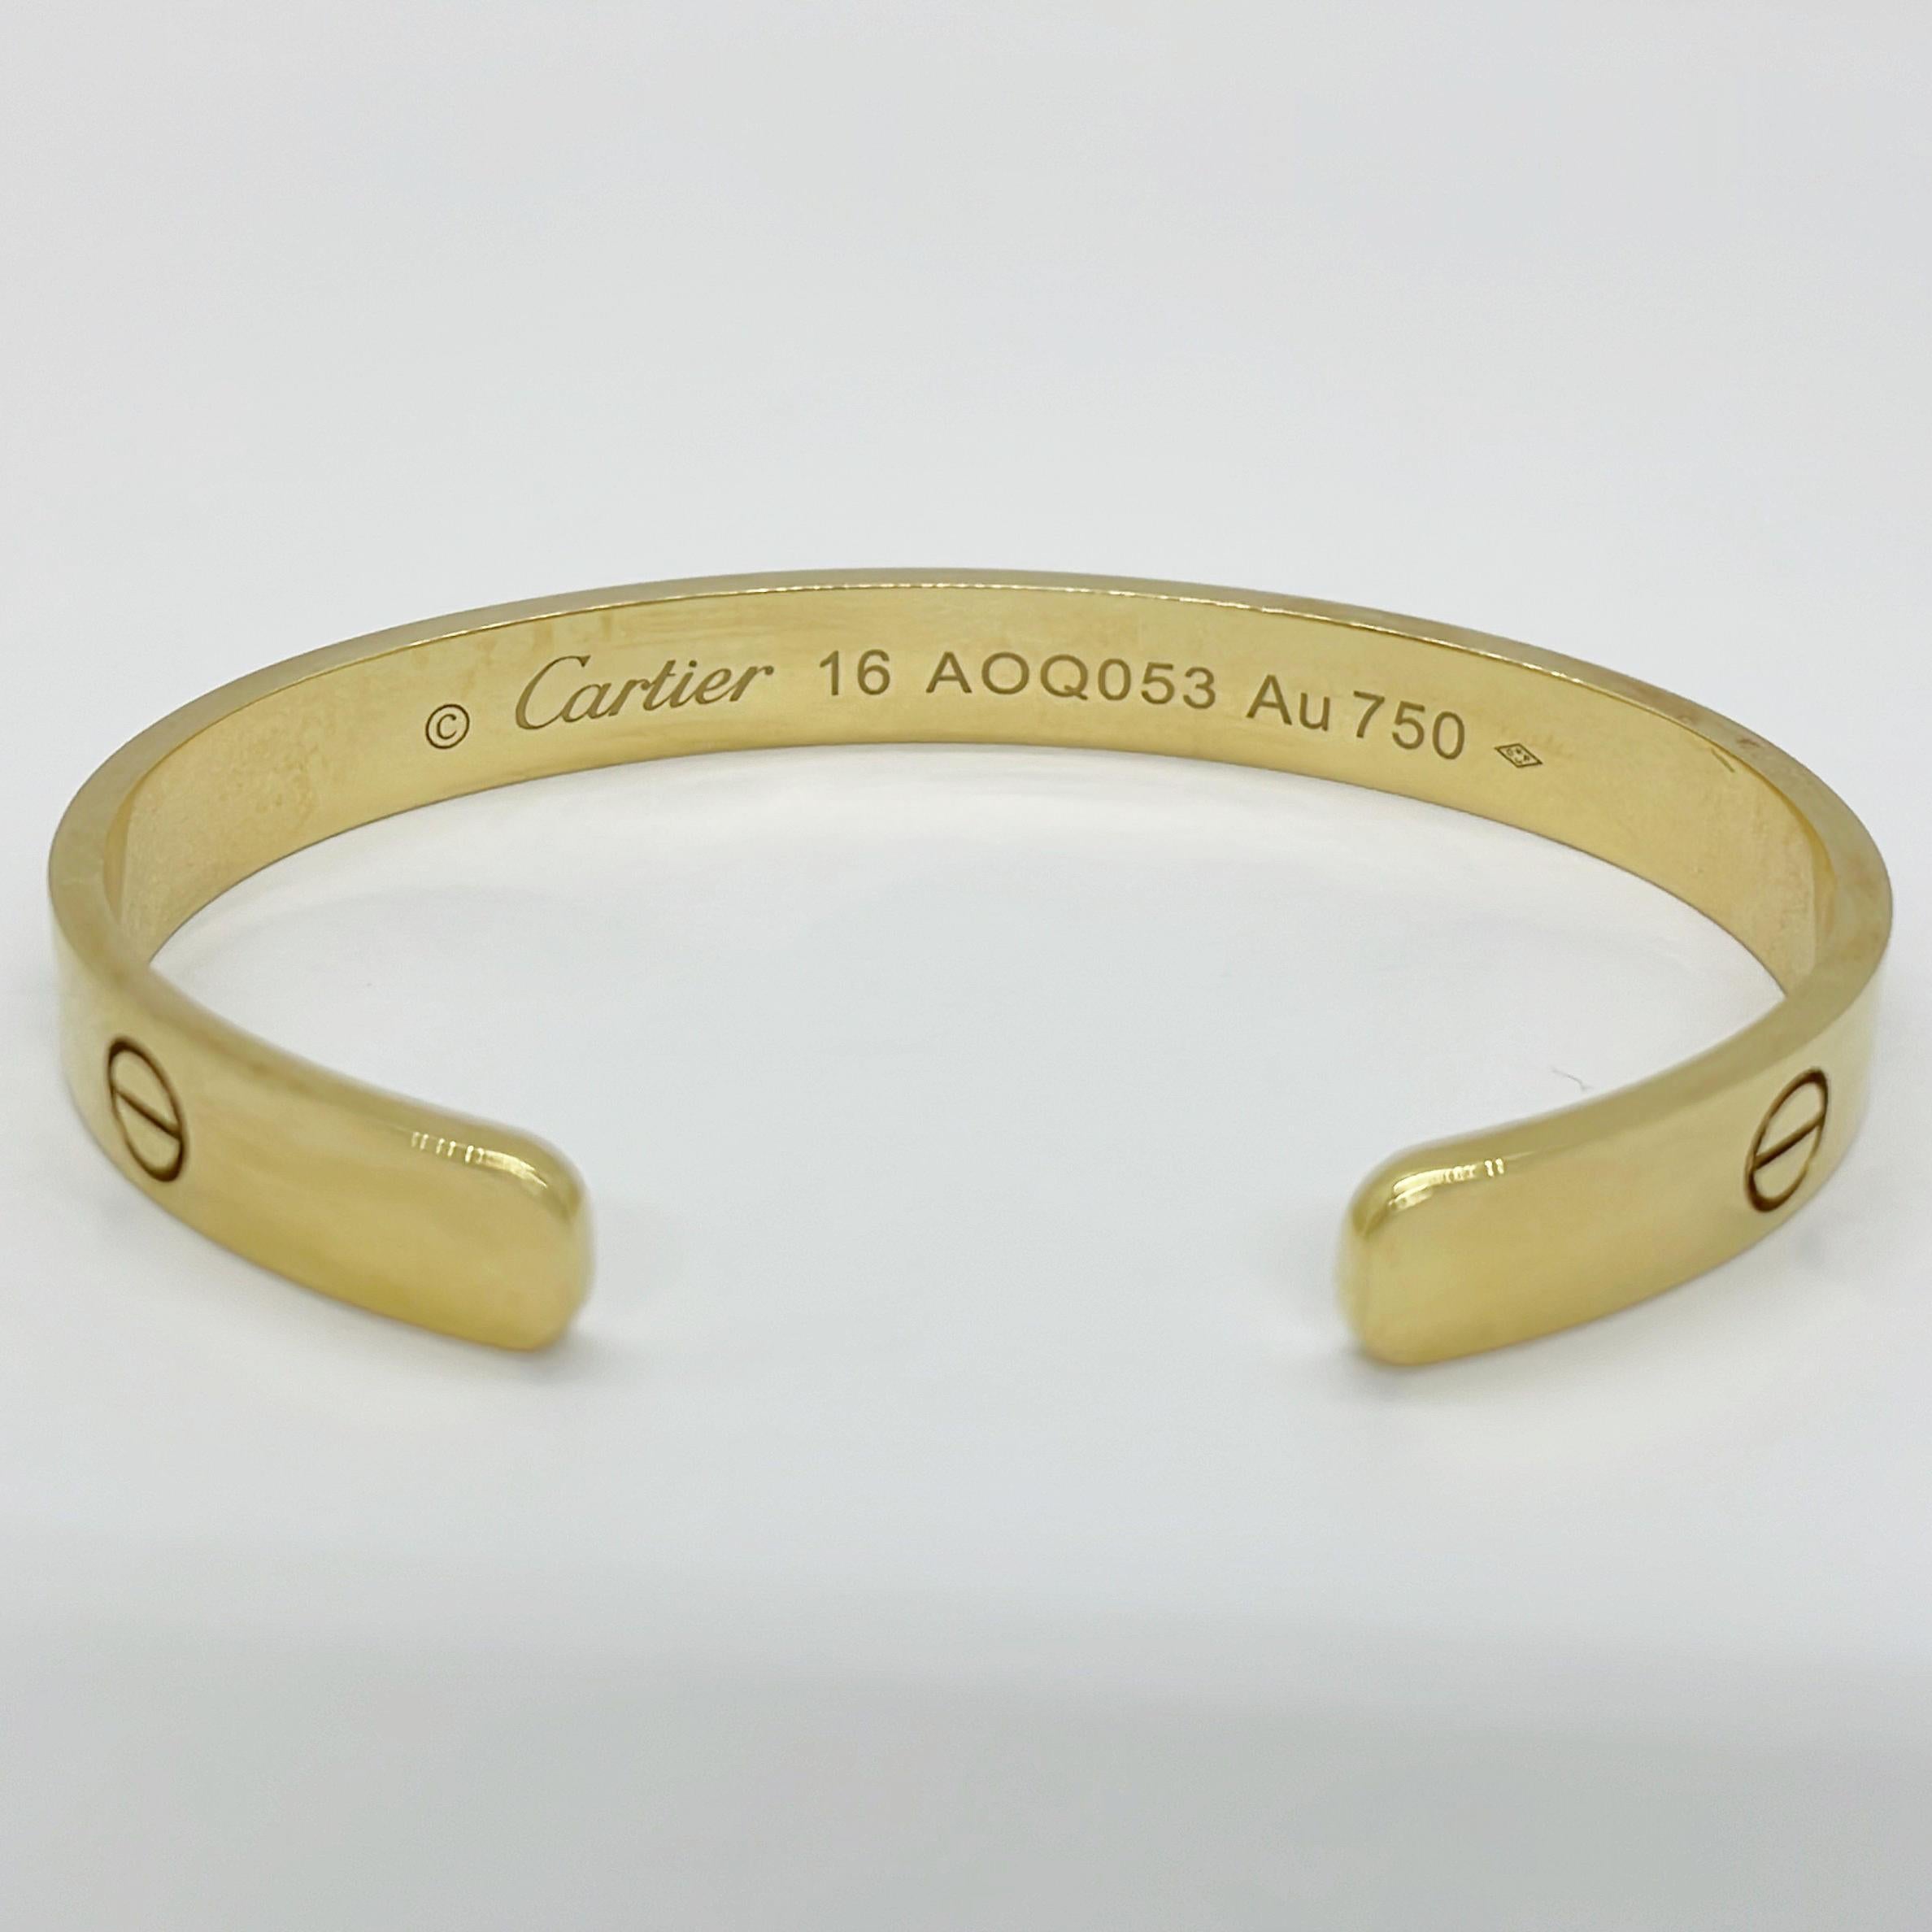 Brand : Cartier
Description: Cartier Love Open Bangle Bracalet 
Metal Type:  750YG/Yellow Gold
Weight  22.0g
Size: 16
Condition: Preowned; small signs of wearing
Box -    Included
Papers -  Not Included
